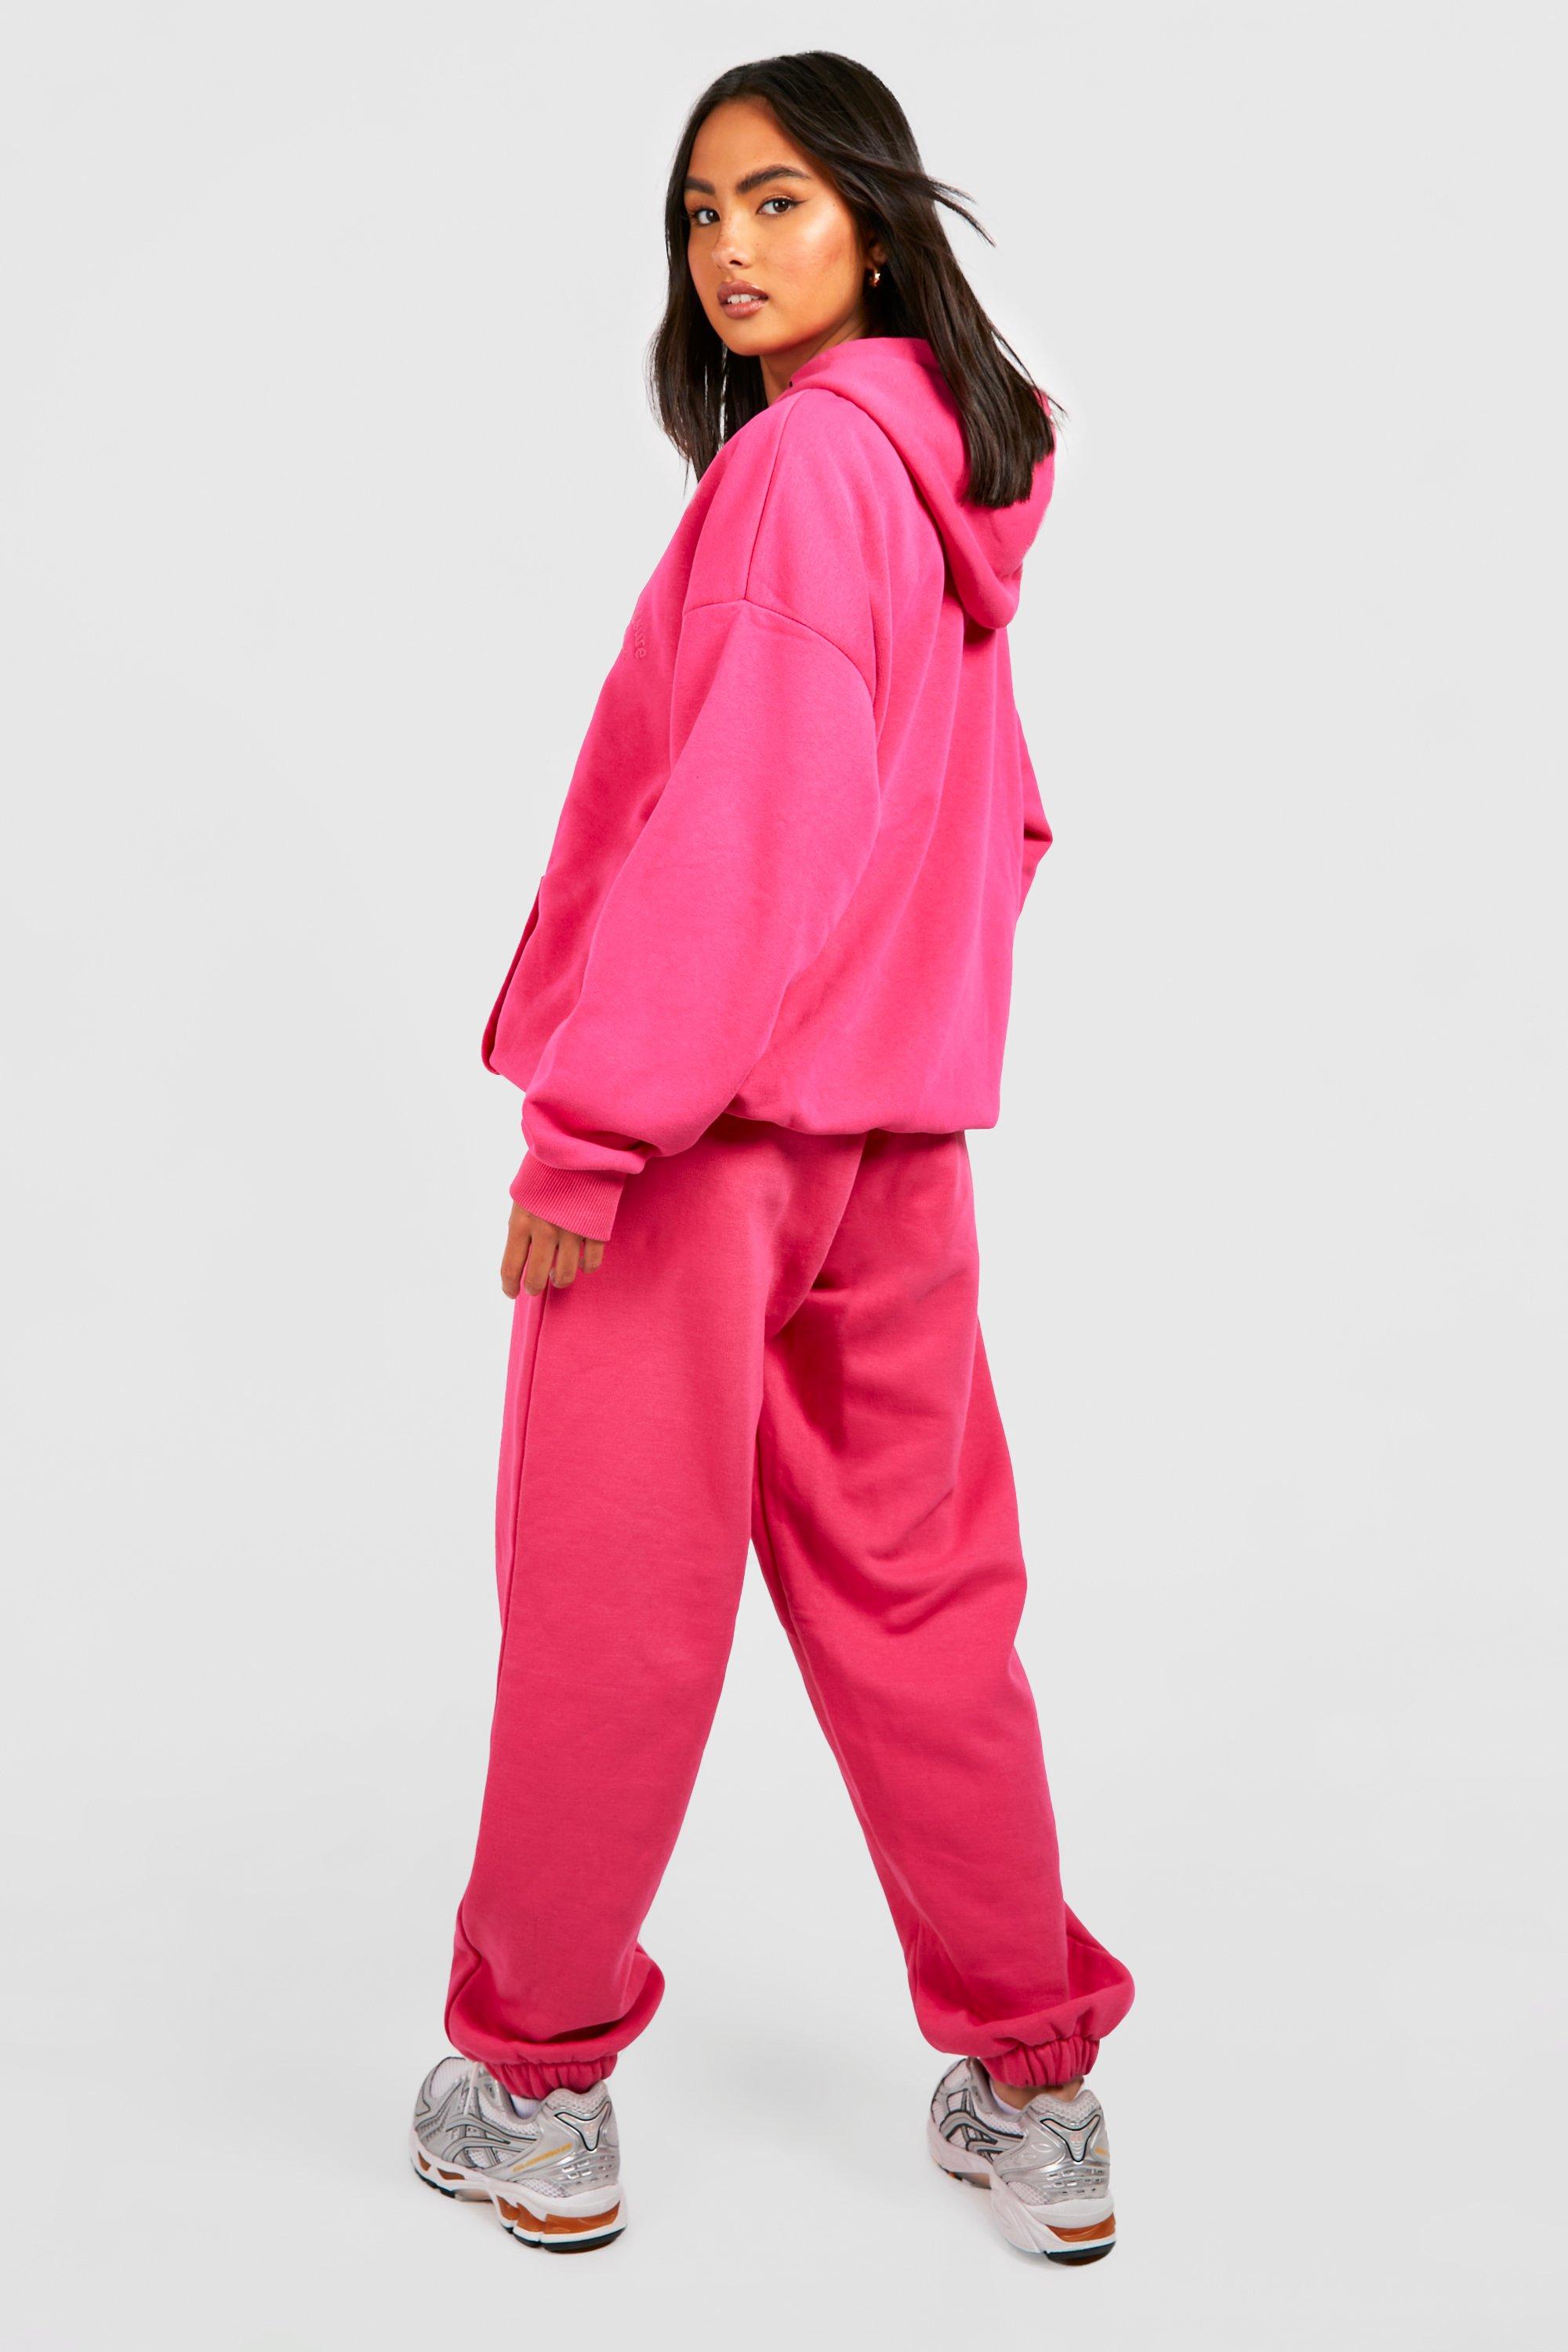 https://media.boohoo.com/i/boohoo/fzz40449_hot%20pink_xl_1/female-hot%20pink-oversized-ofcl-studio-embroidered-tracksuit